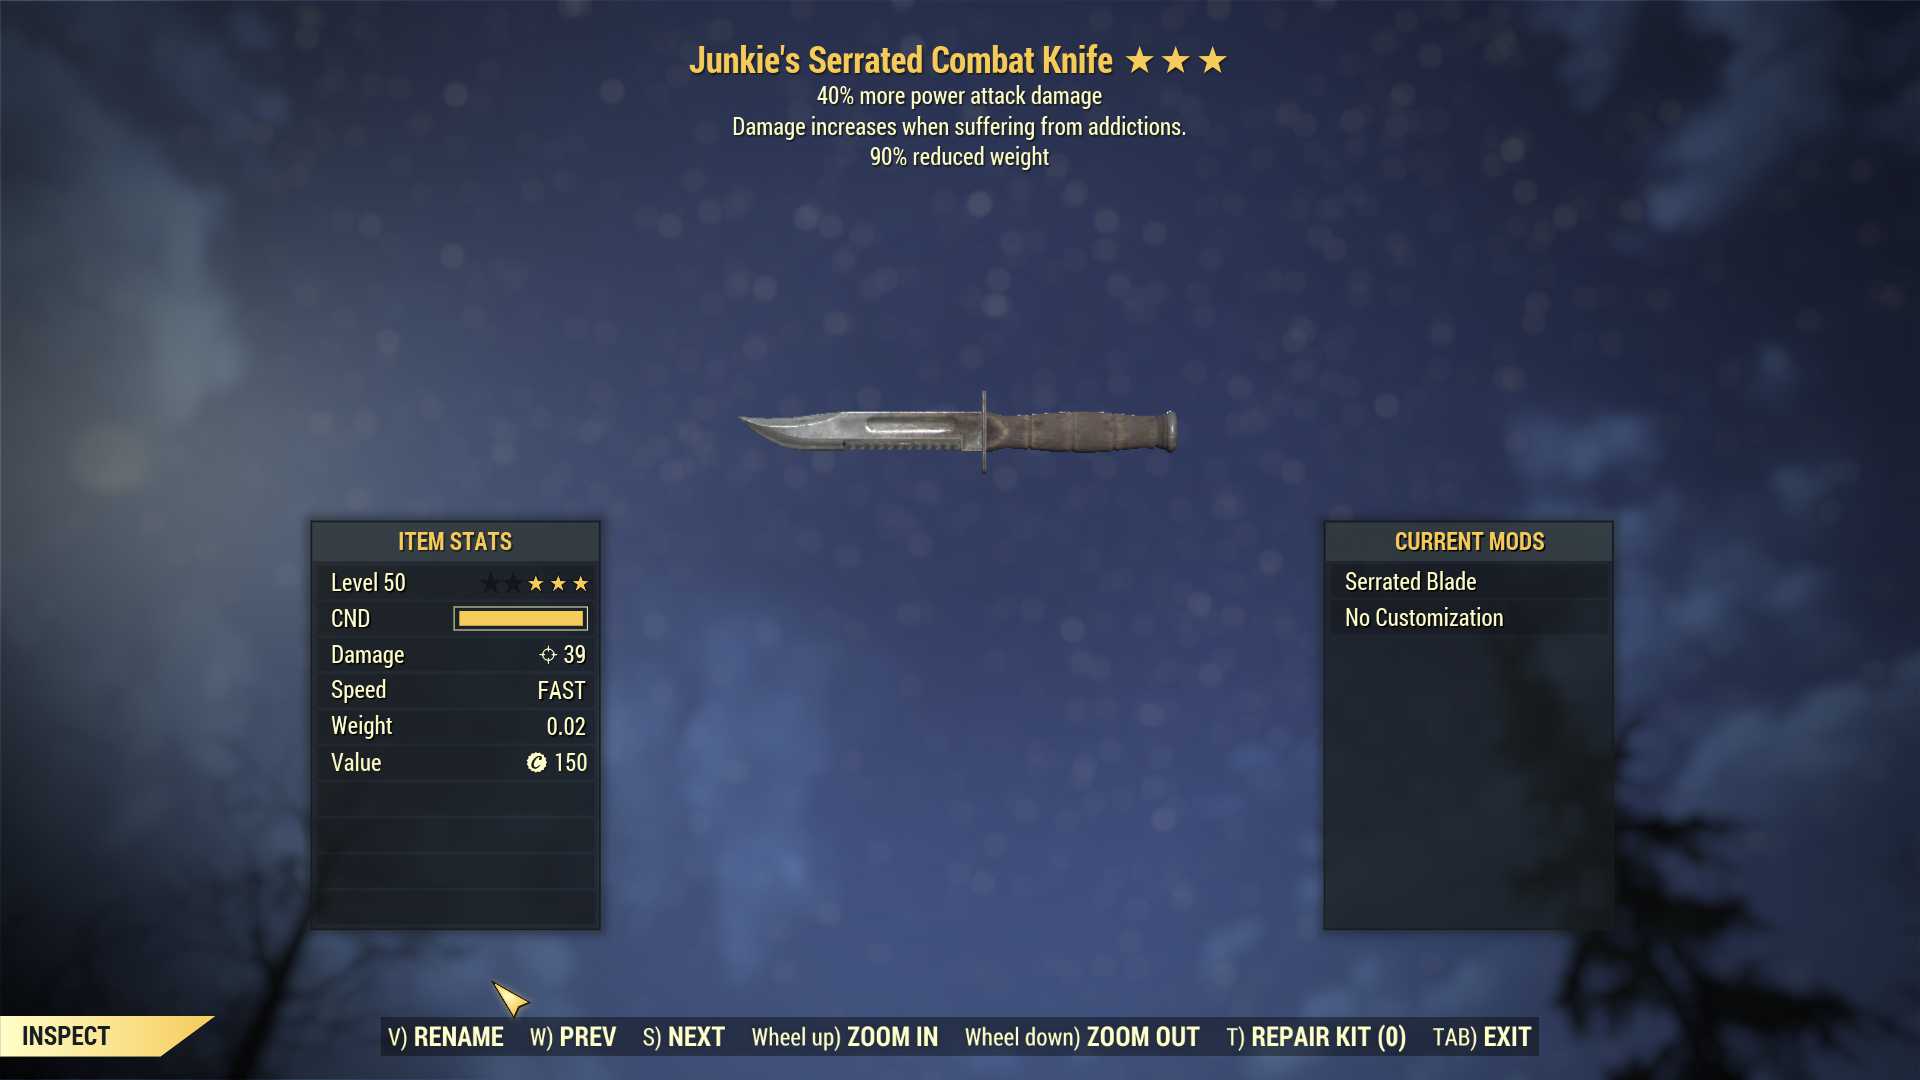 Junkie's Combat Knife (+40% damage PA, 90% reduced weight)